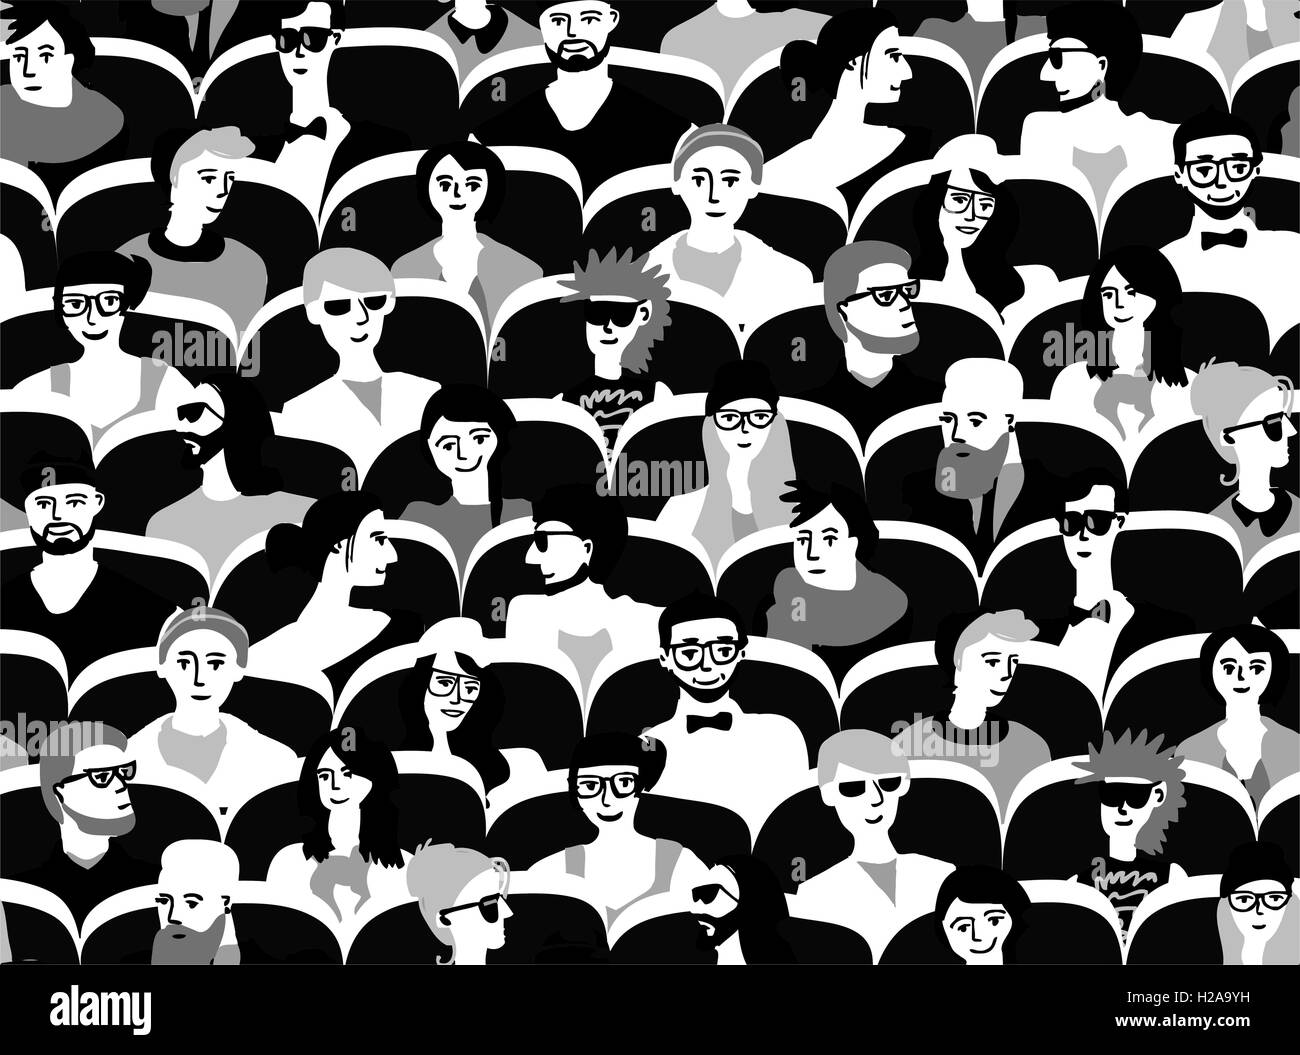 Audience group people sitting black and white seamless pattern Stock Vector